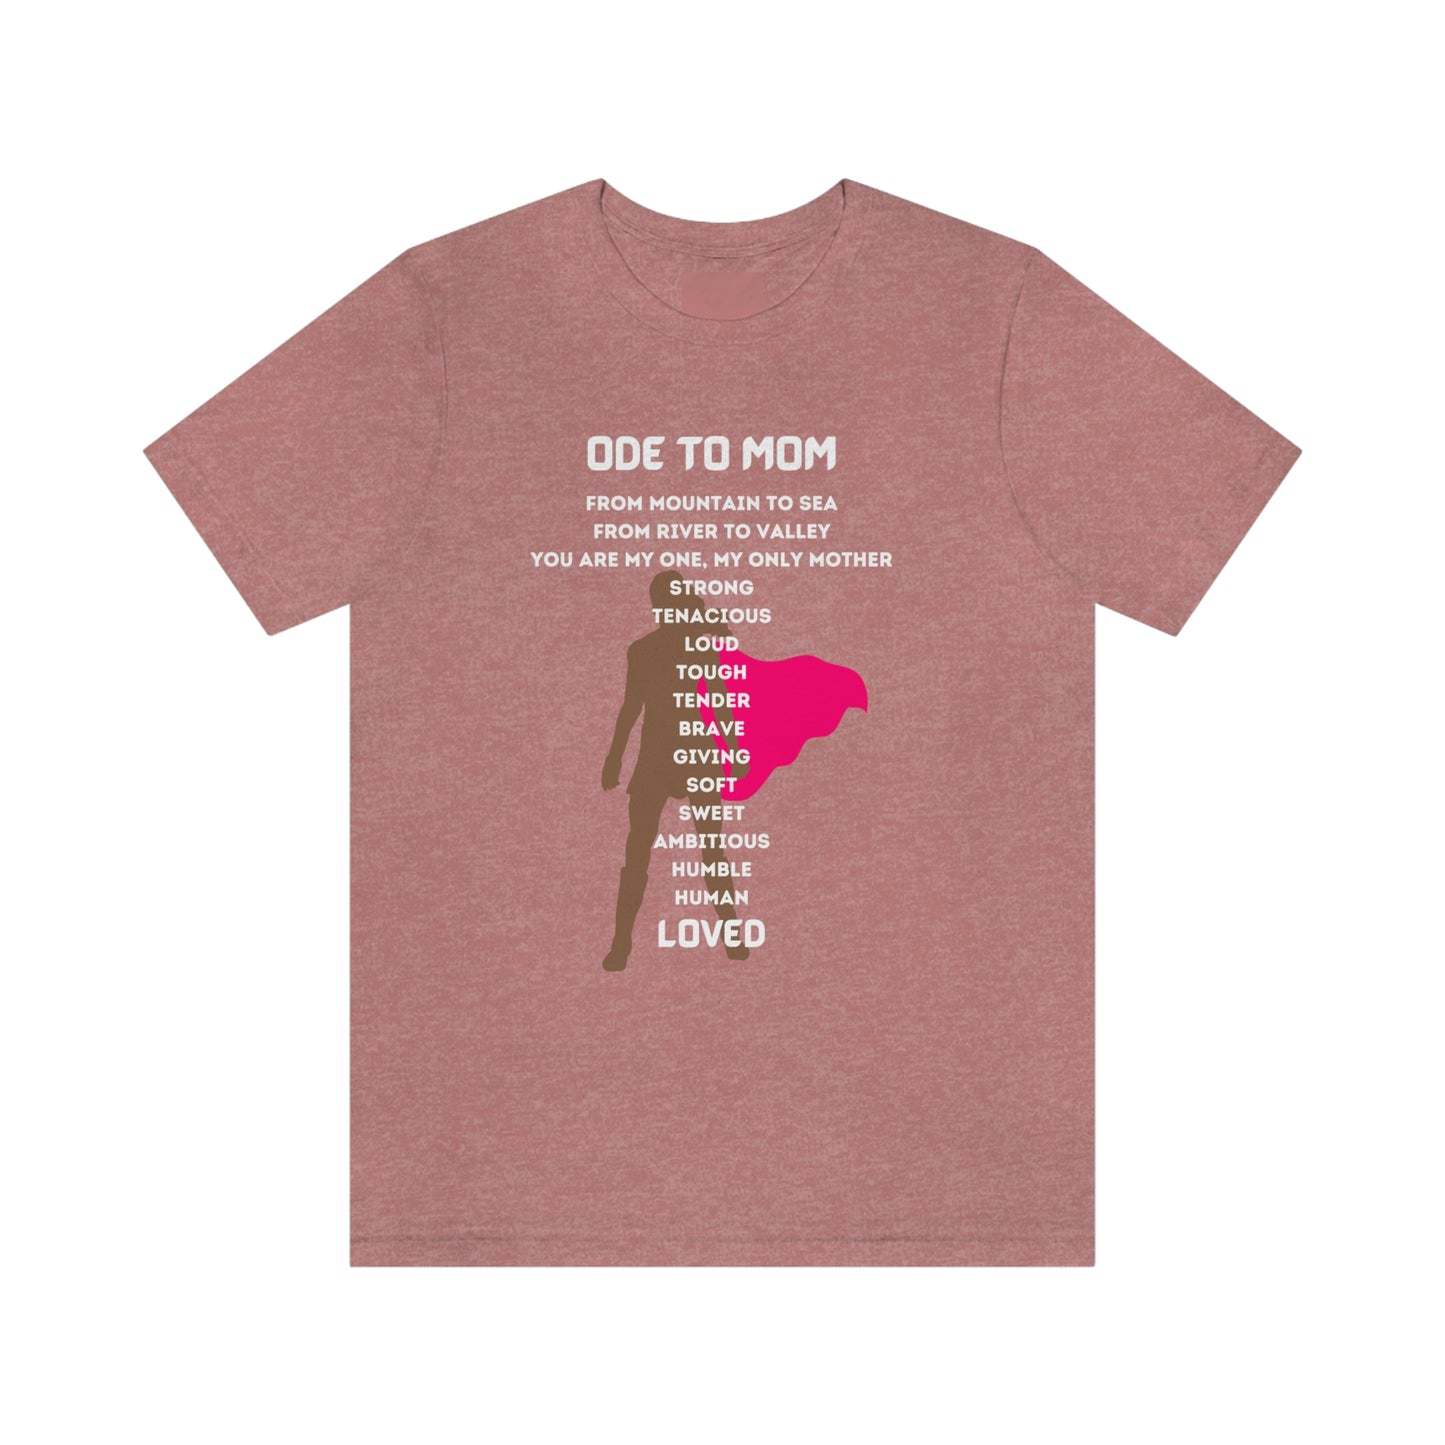 ODE TO MOM CREW NECK T SHIRT GIFT FOR MOMS